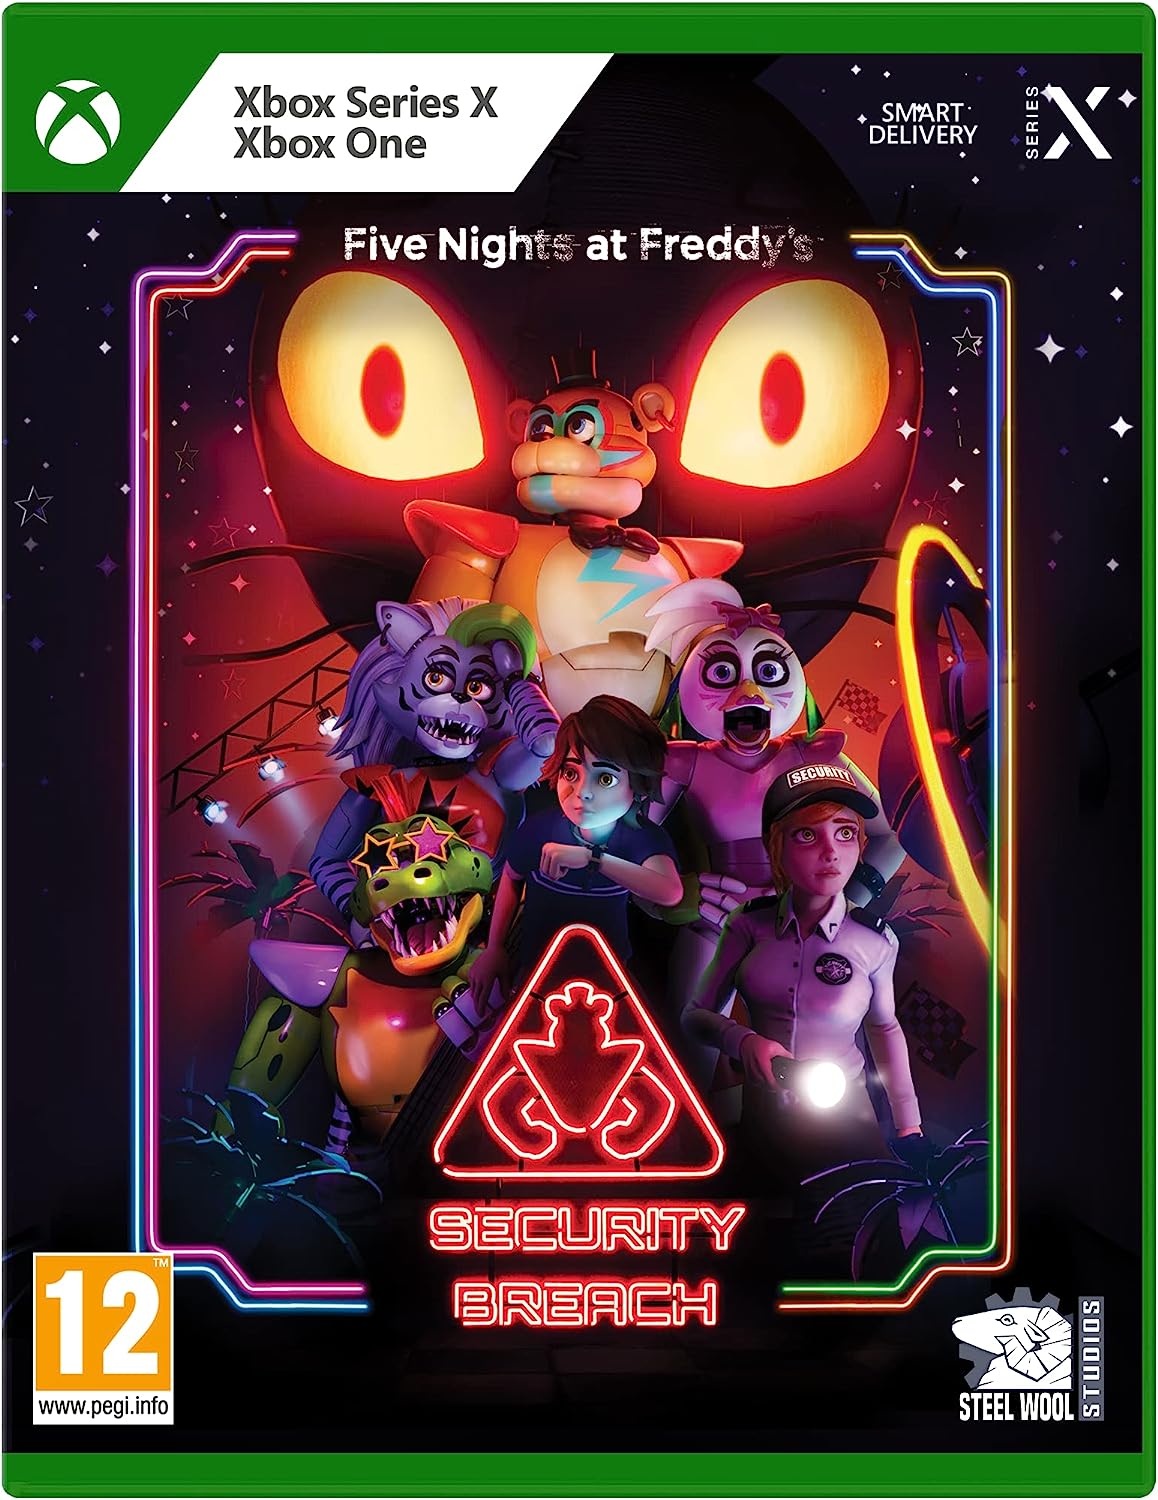 Came out a new, free game of Five Nights at Freddy's series